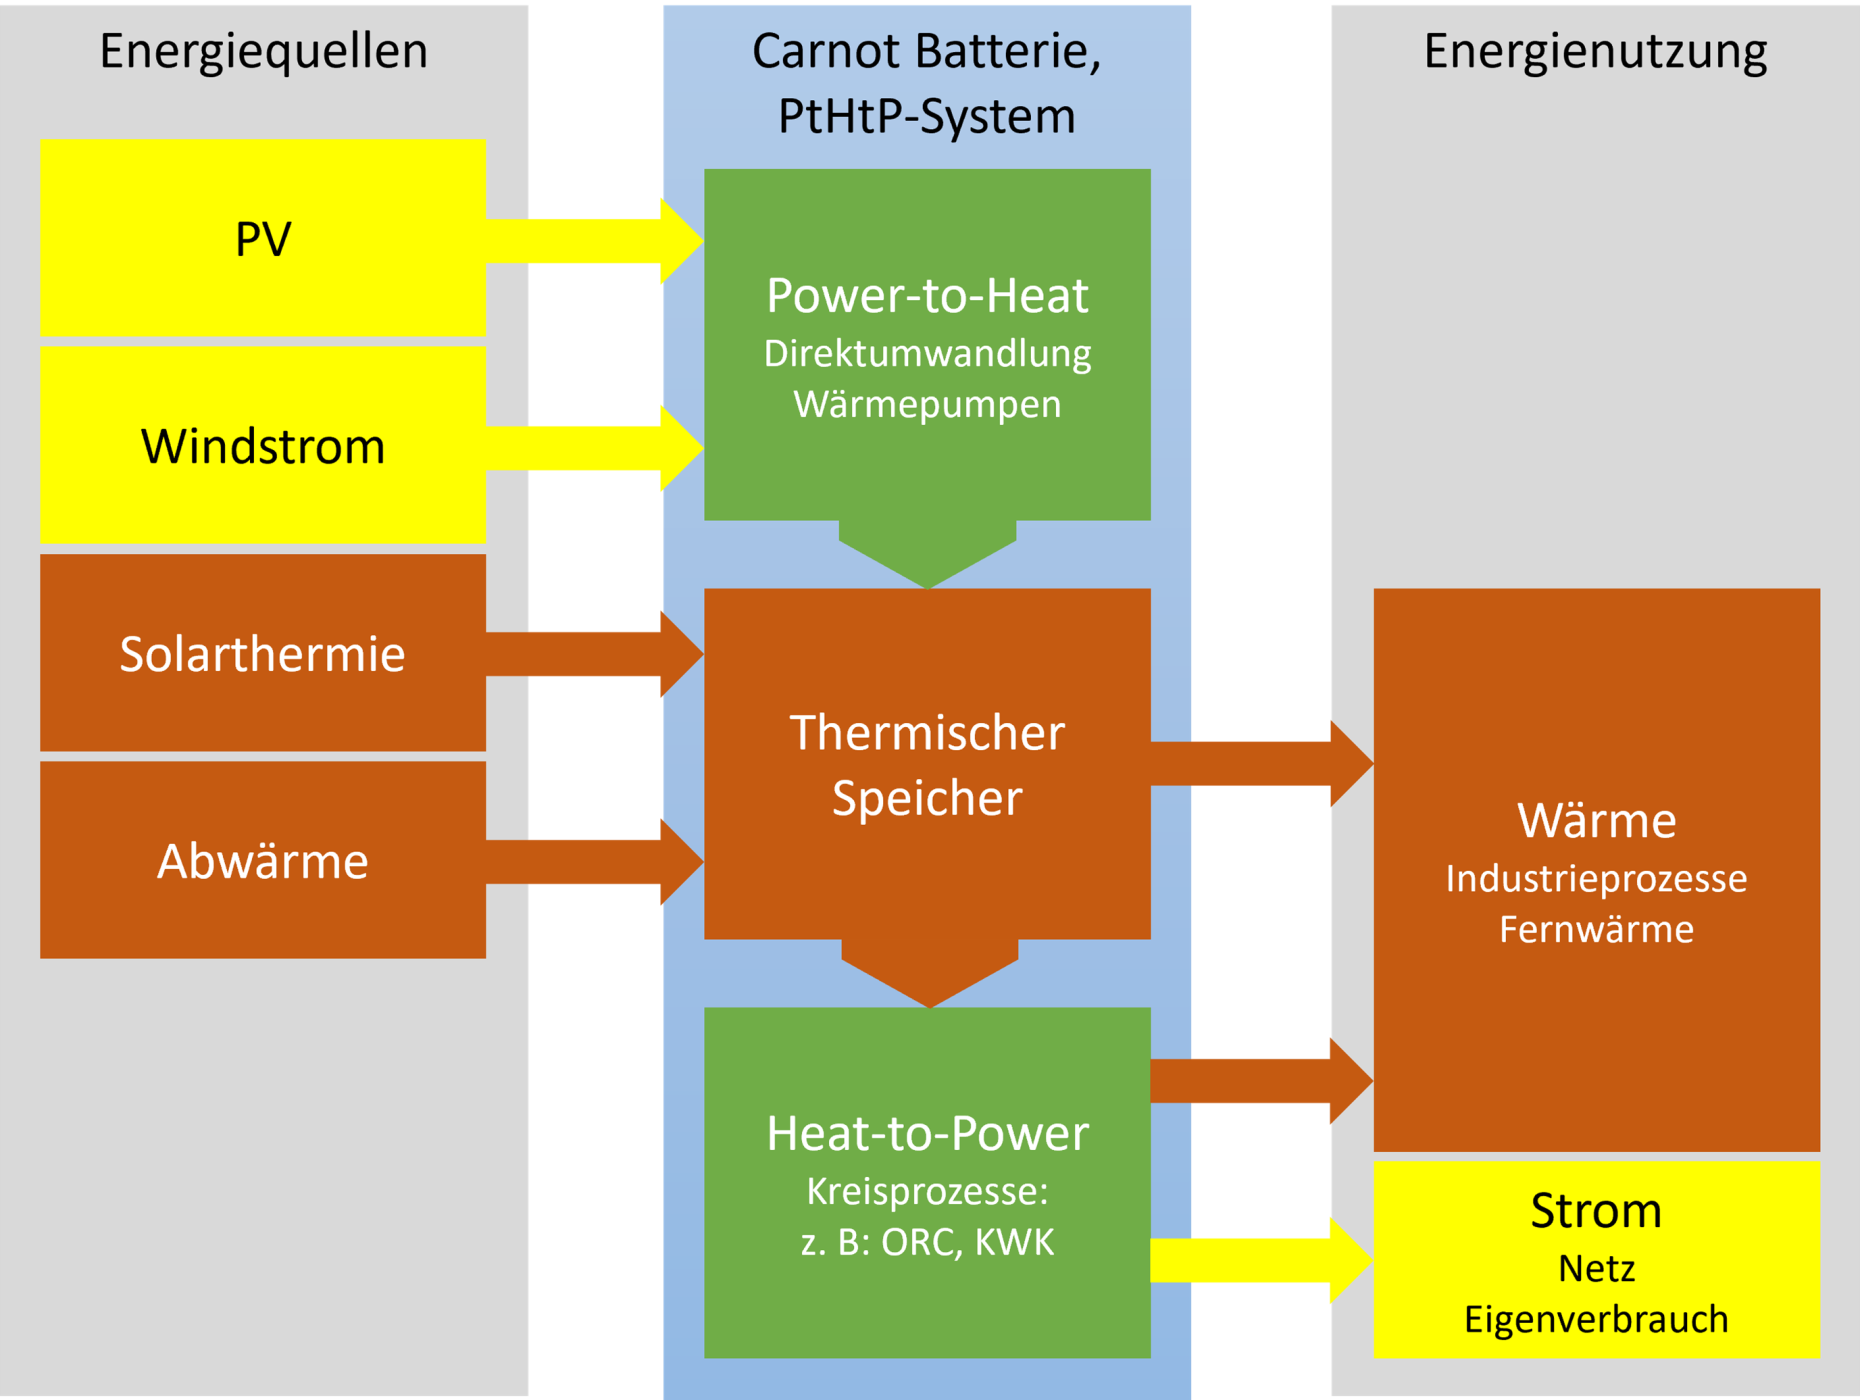 A Carnot battery (power-to-heat-to-power system) converts electrical energy into thermal energy and stores it for a longer period of time before converting the stored energy back into electrical power. Carnot batteries are used for long-term, seasonal storage of electrical power and also heat, and can therefore contribute to stabilizing the power grid and storing electricity from renewable energy sources.